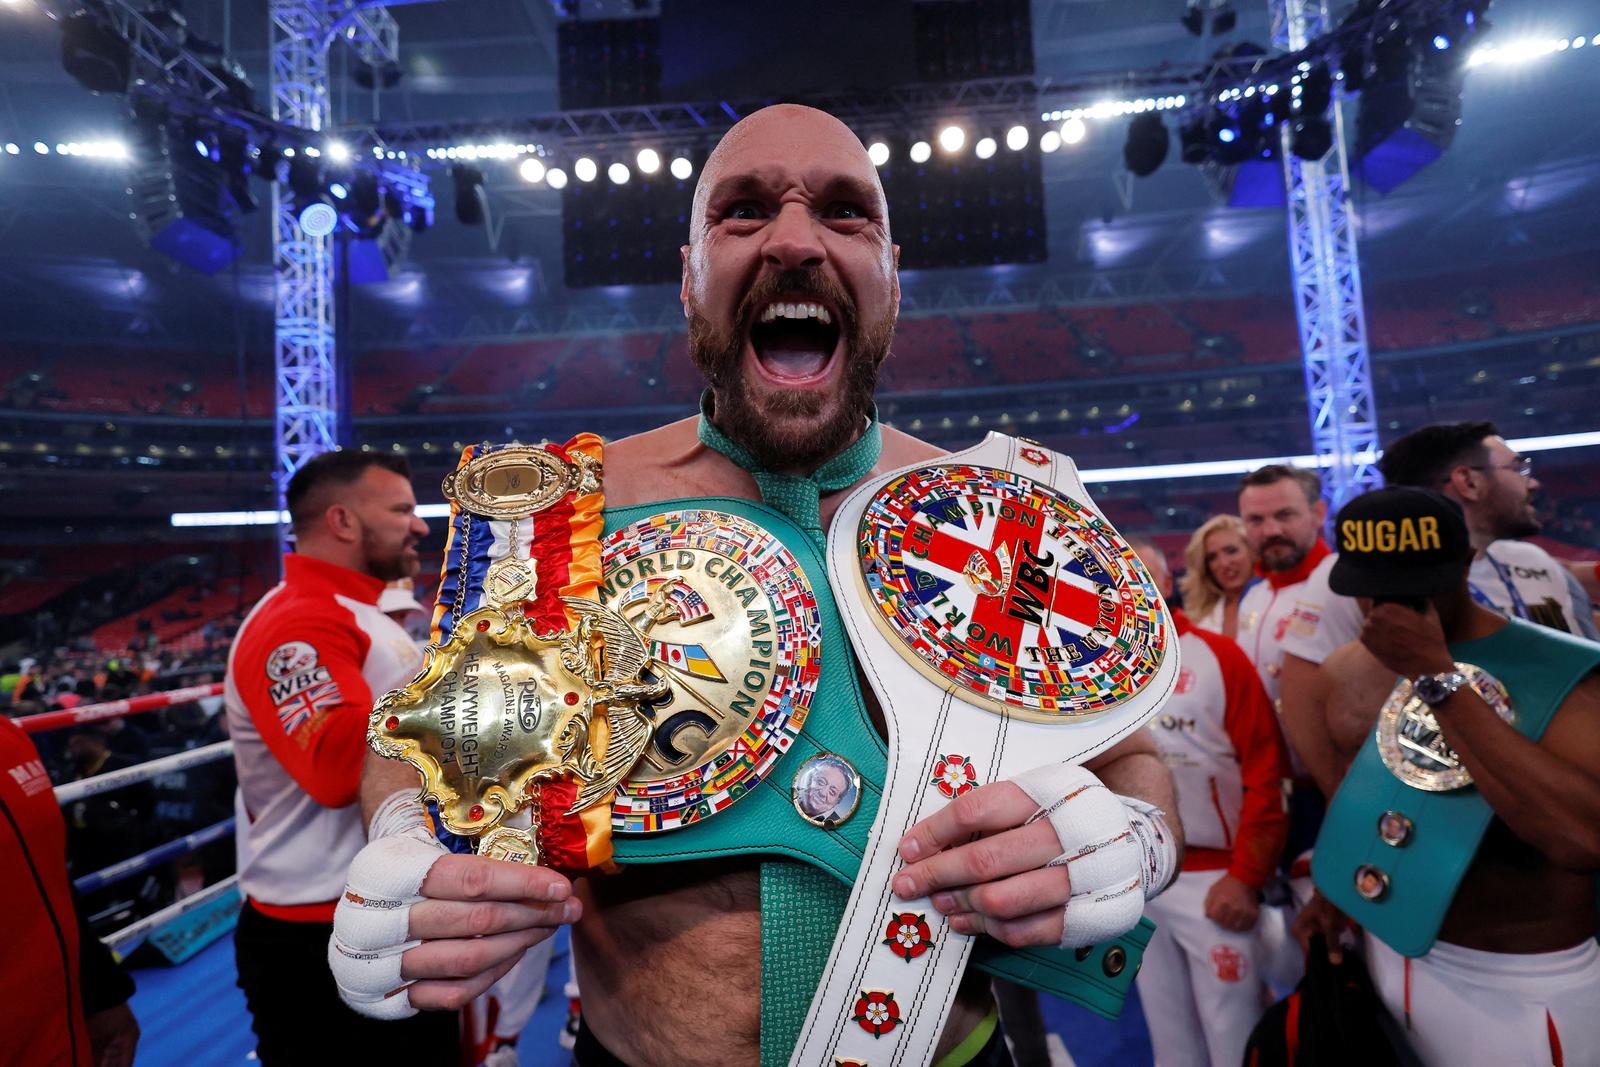 FILE PHOTO: Boxing - Tyson Fury v Dillian Whyte - WBC World Heavyweight Title - Wembley Stadium, London, Britain - April 23, 2022  Tyson Fury celebrates with the belts after winning his fight against Dillian Whyte Action Images via Reuters/Andrew Couldridge/File Photo Photo: Andrew Couldridge/REUTERS